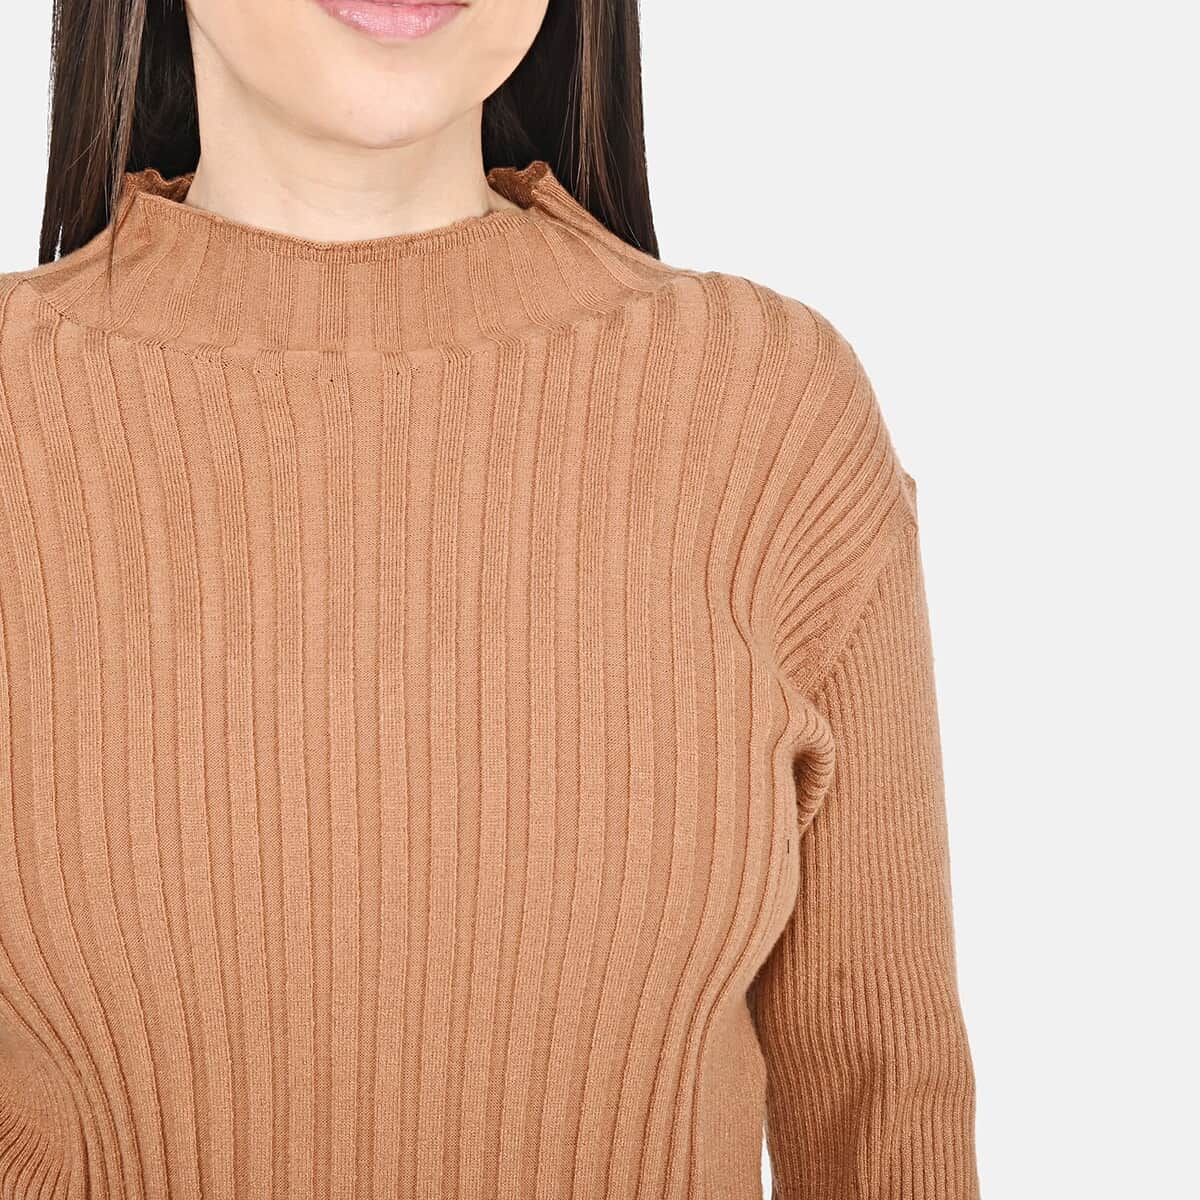 Tamsy Brown Knit Turtleneck Sweater - XS image number 4